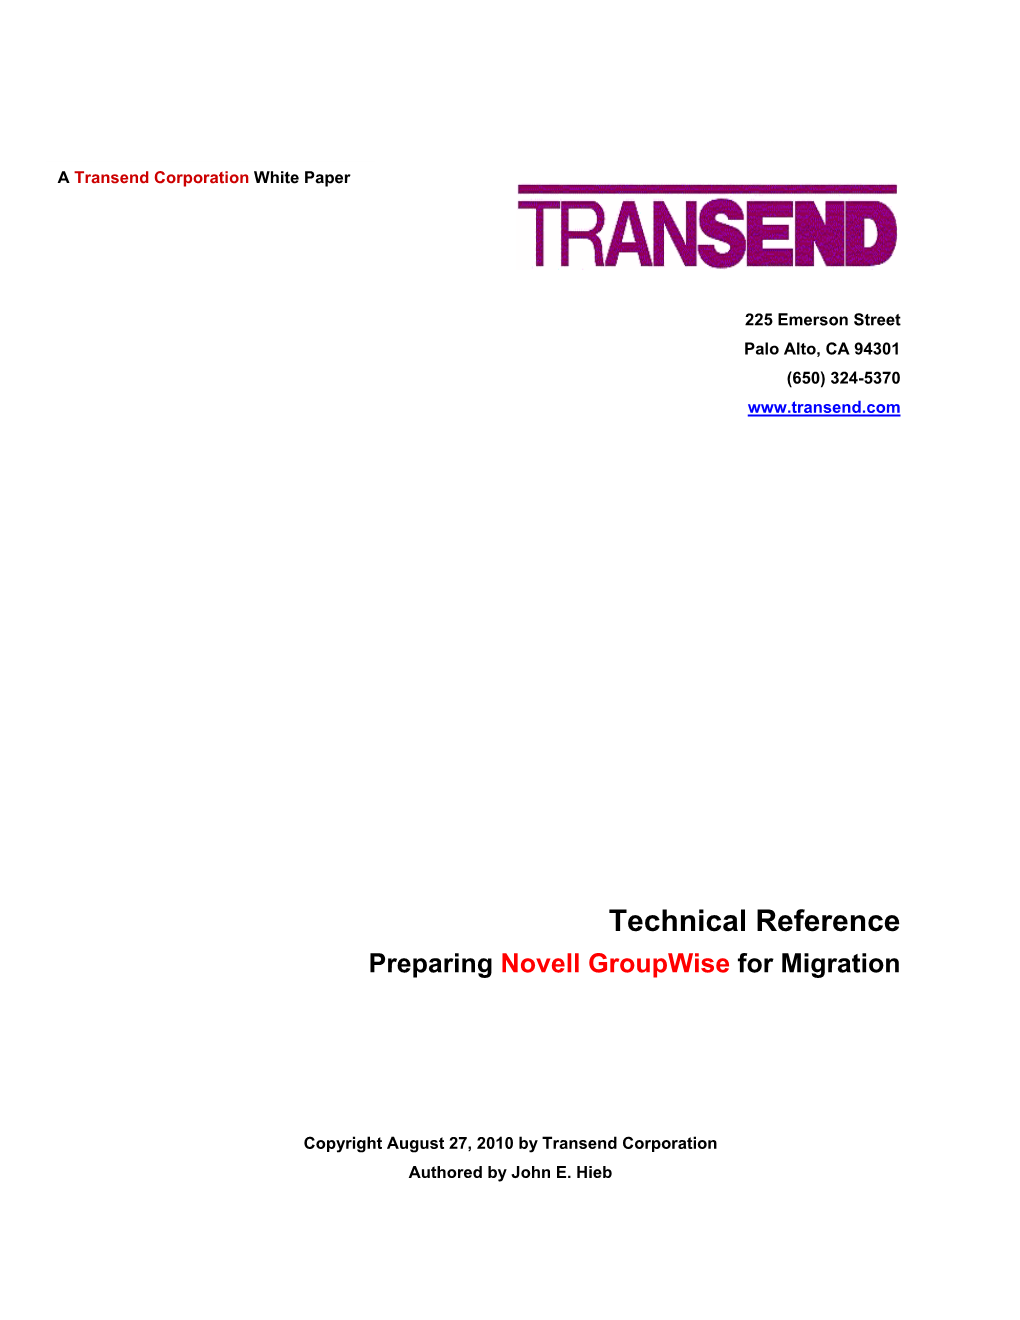 Technical Reference Preparing Novell Groupwise for Migration